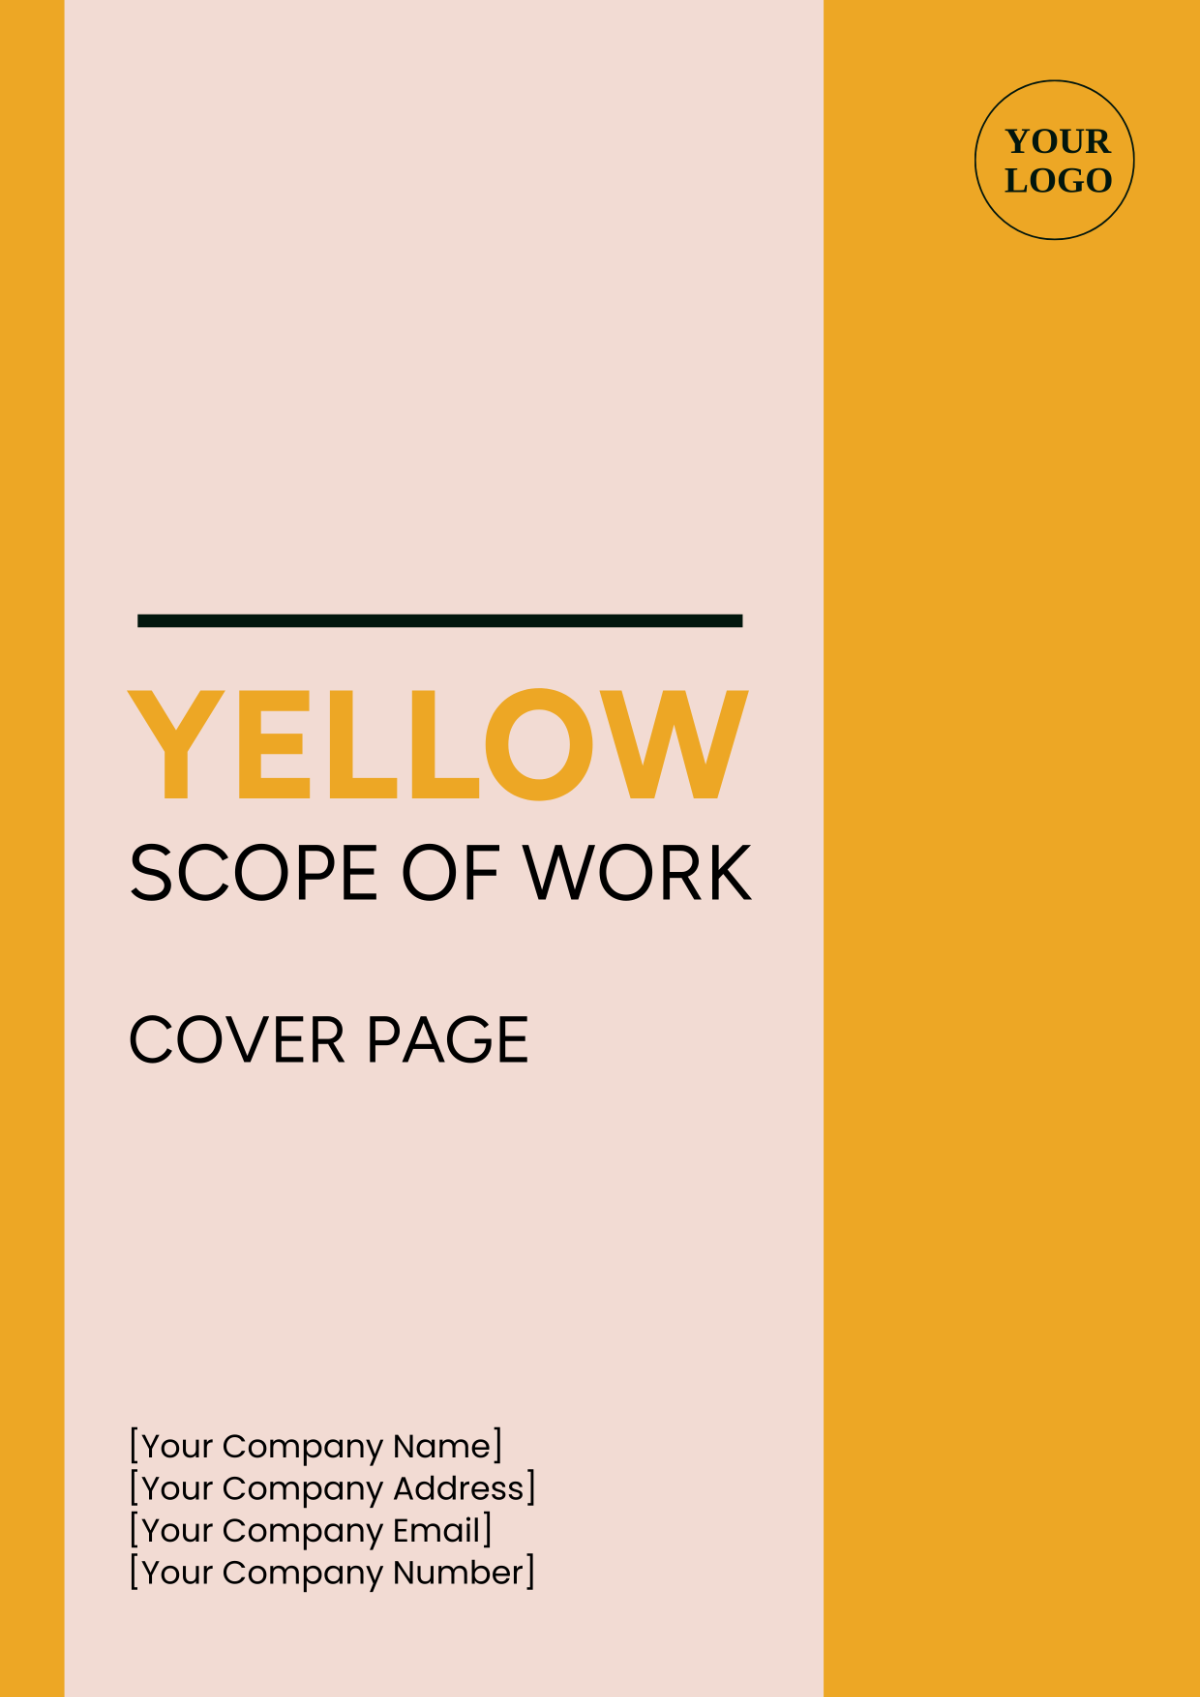 Yellow Scope of Work Cover Page